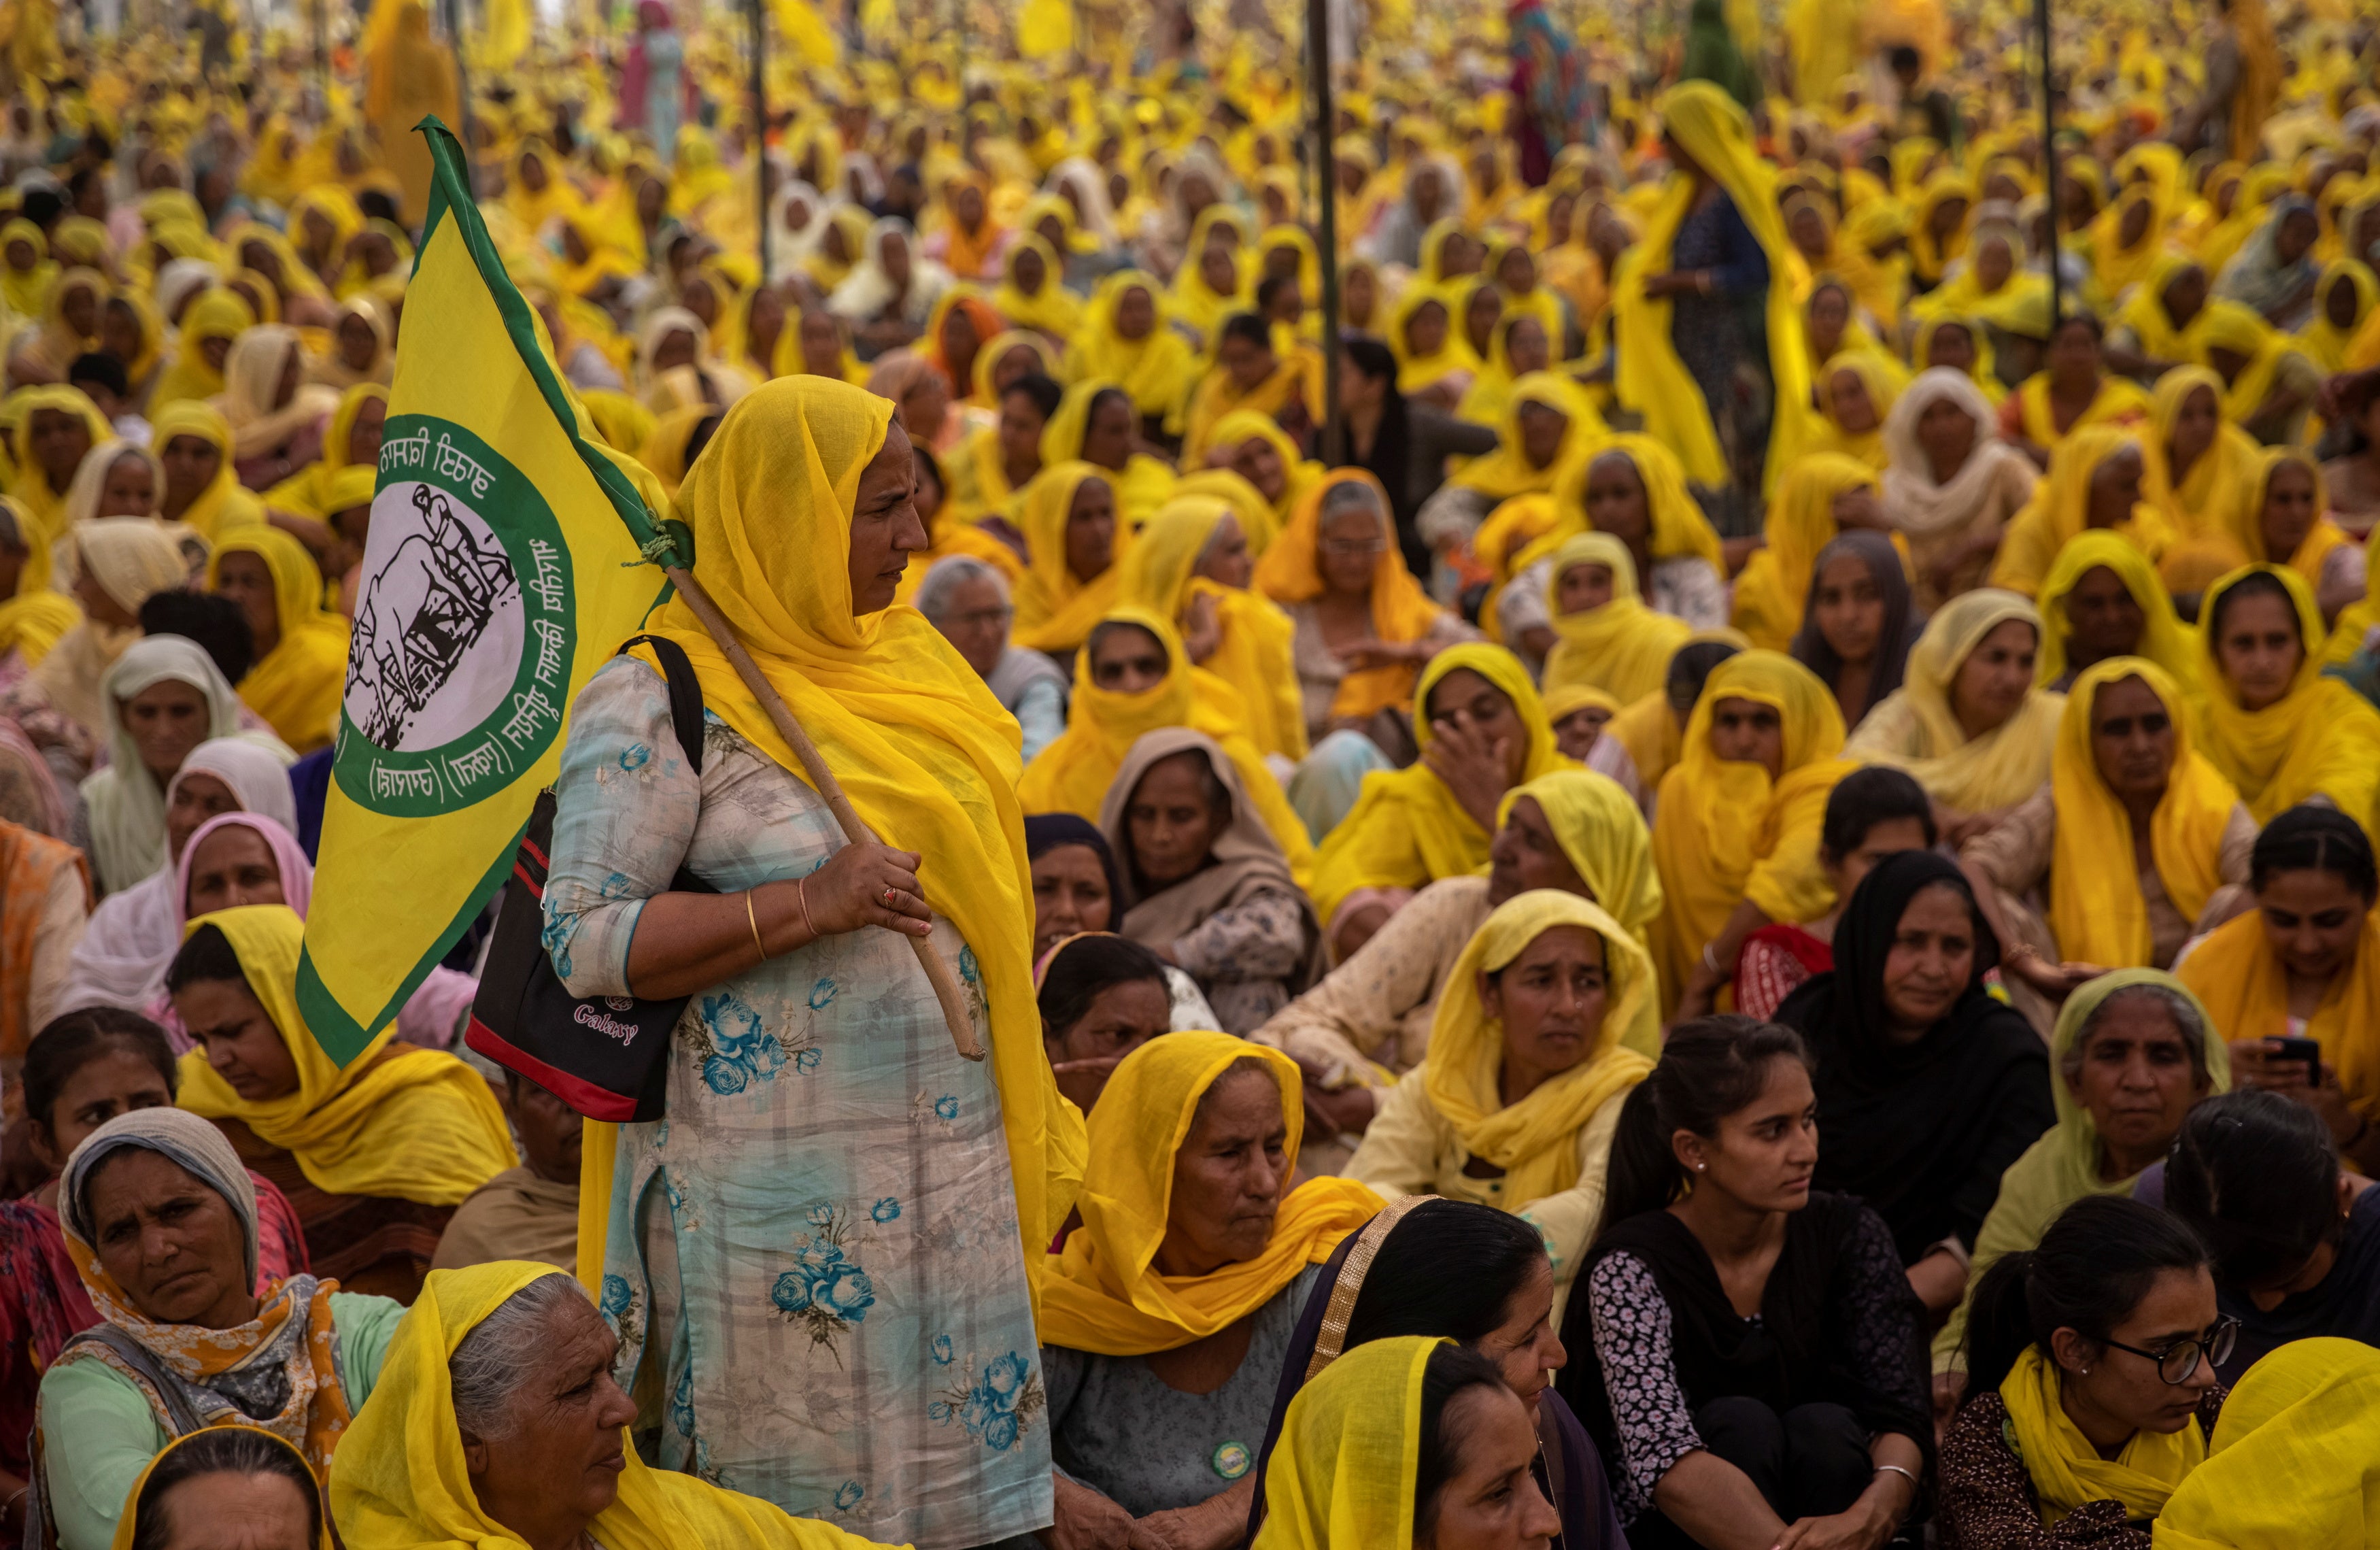 Women farmers attend a protest against farm laws on the occasion of International Women’s Day at Bahadurgar, India